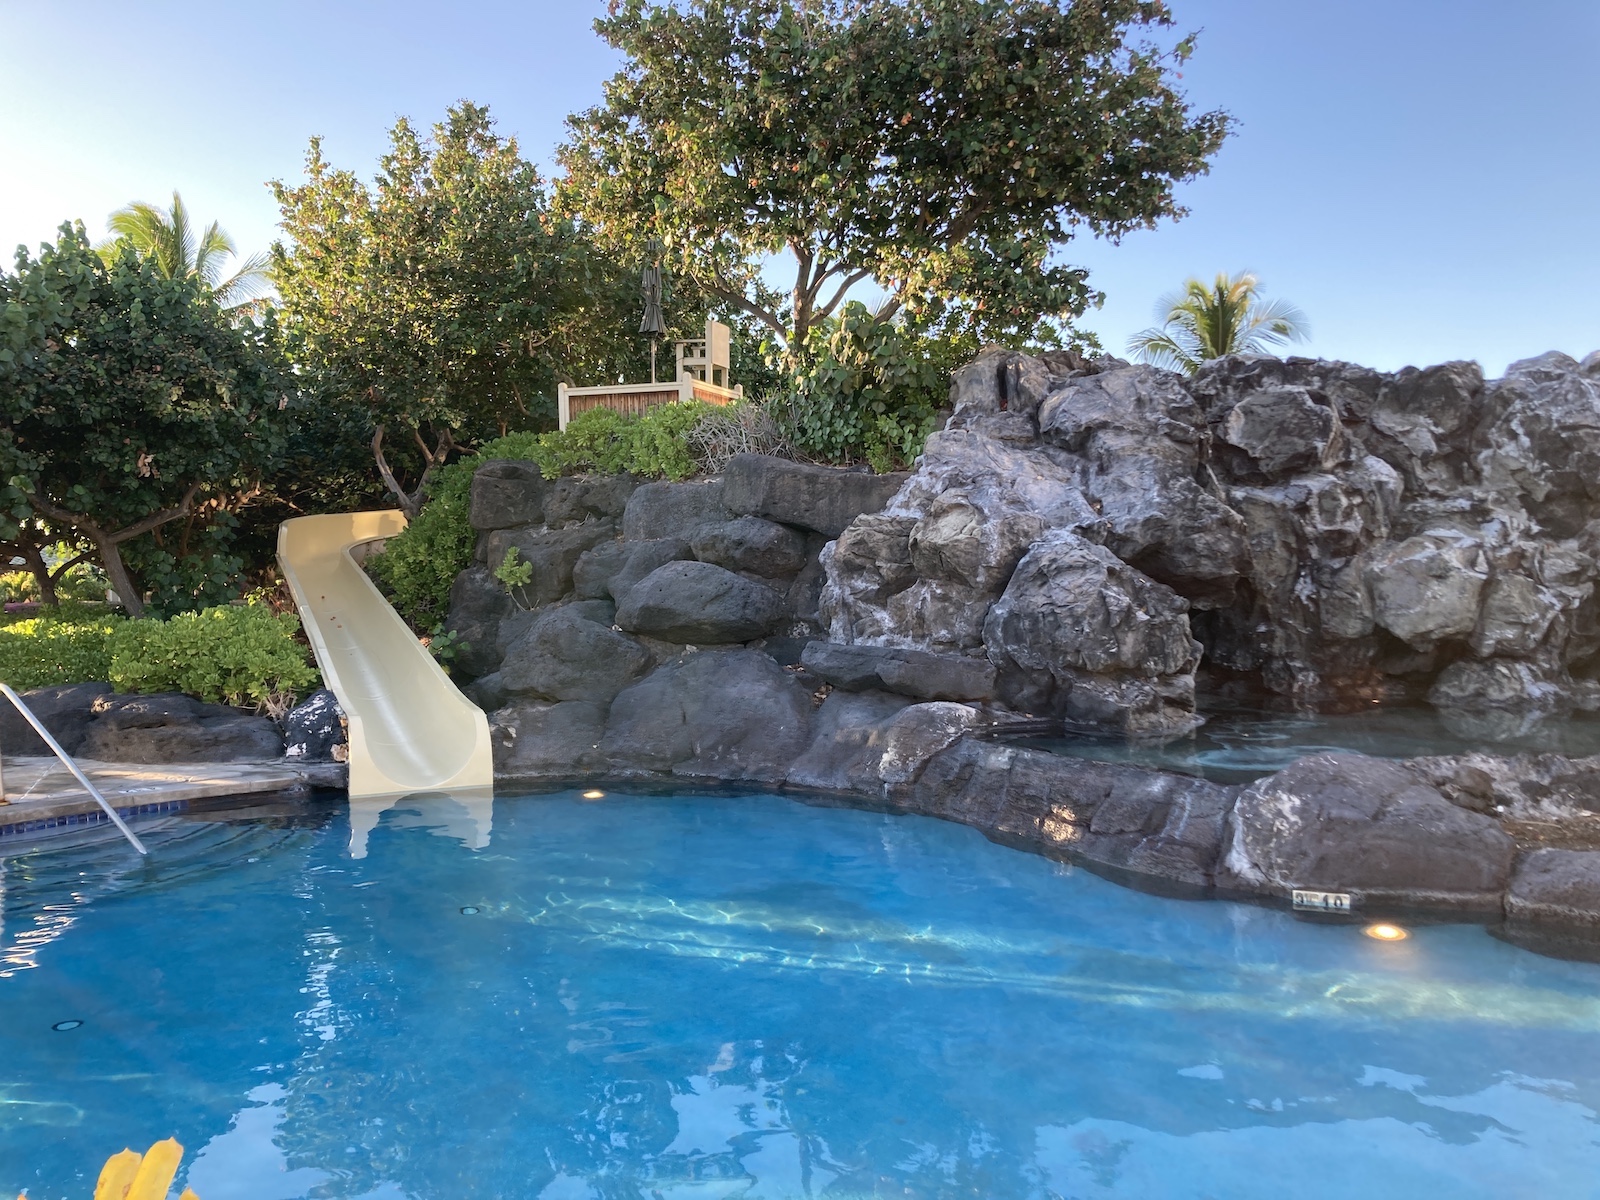 Photo of a water slide coming down from some rocks into a pool below